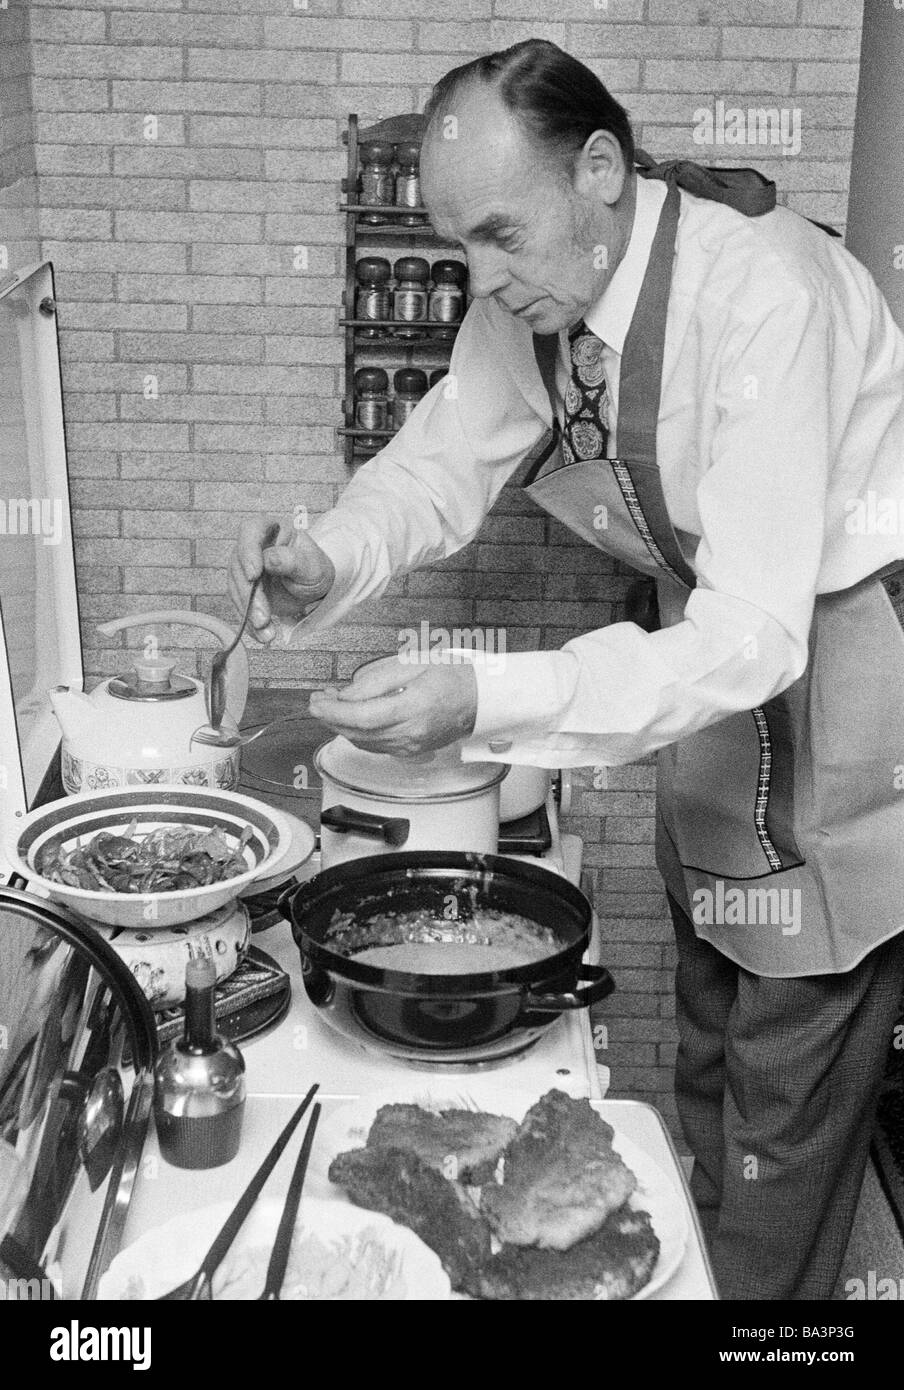 Seventies, black and white photo, people, older man stands at the cooking-stove and prepares the food, aged 60 to 70 years, Josef Stock Photo